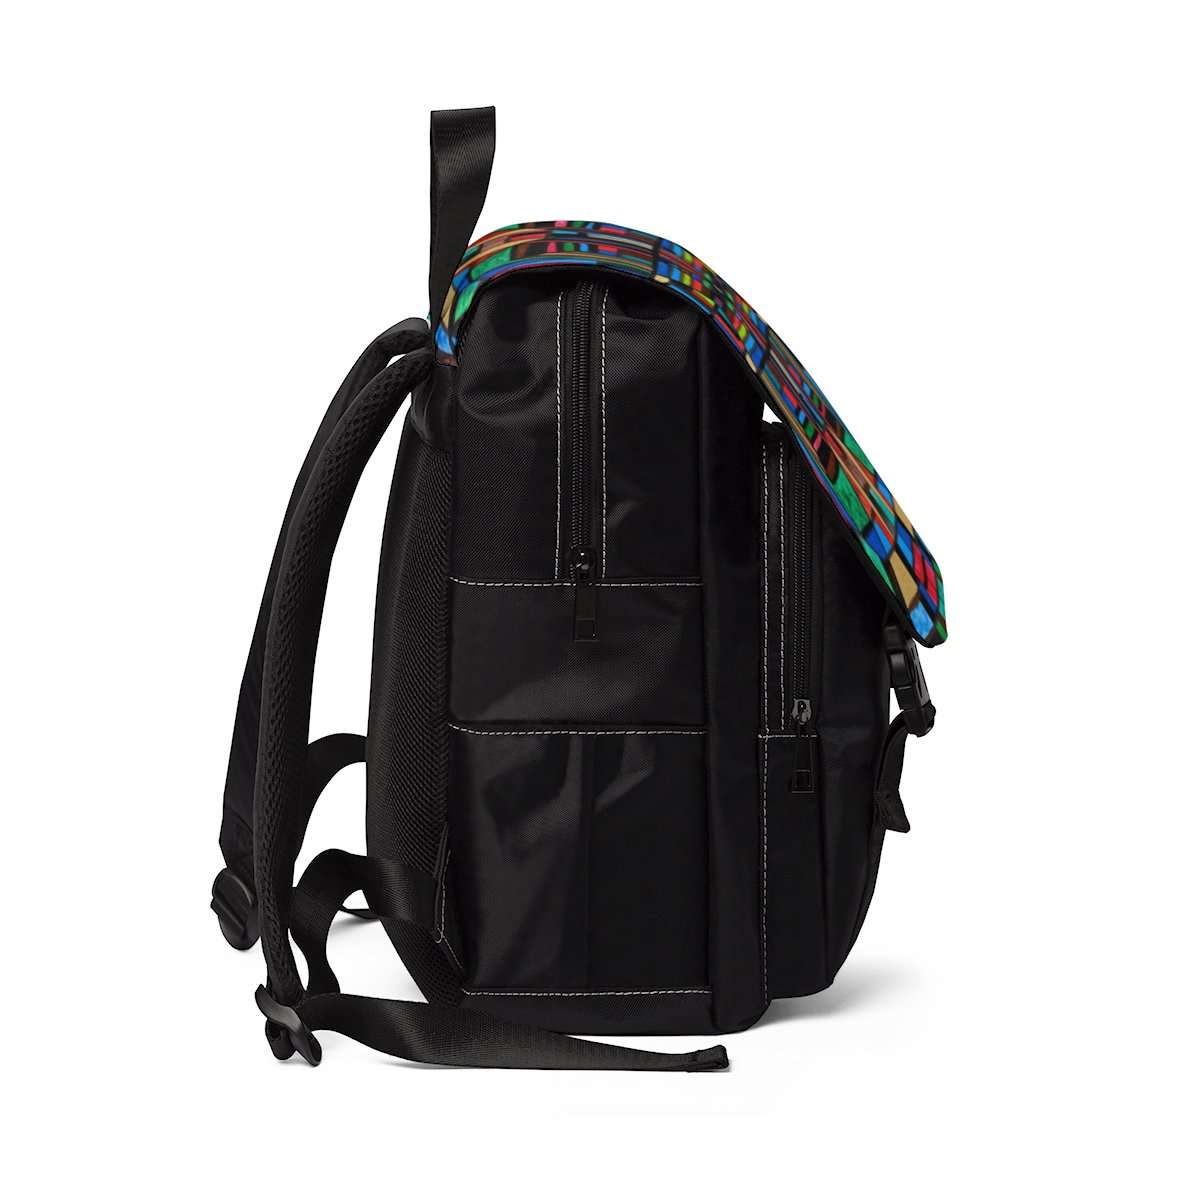 we-offer-the-best-prices-on-the-best-of-organization-unisex-casual-shoulder-backpack-online_1.jpg